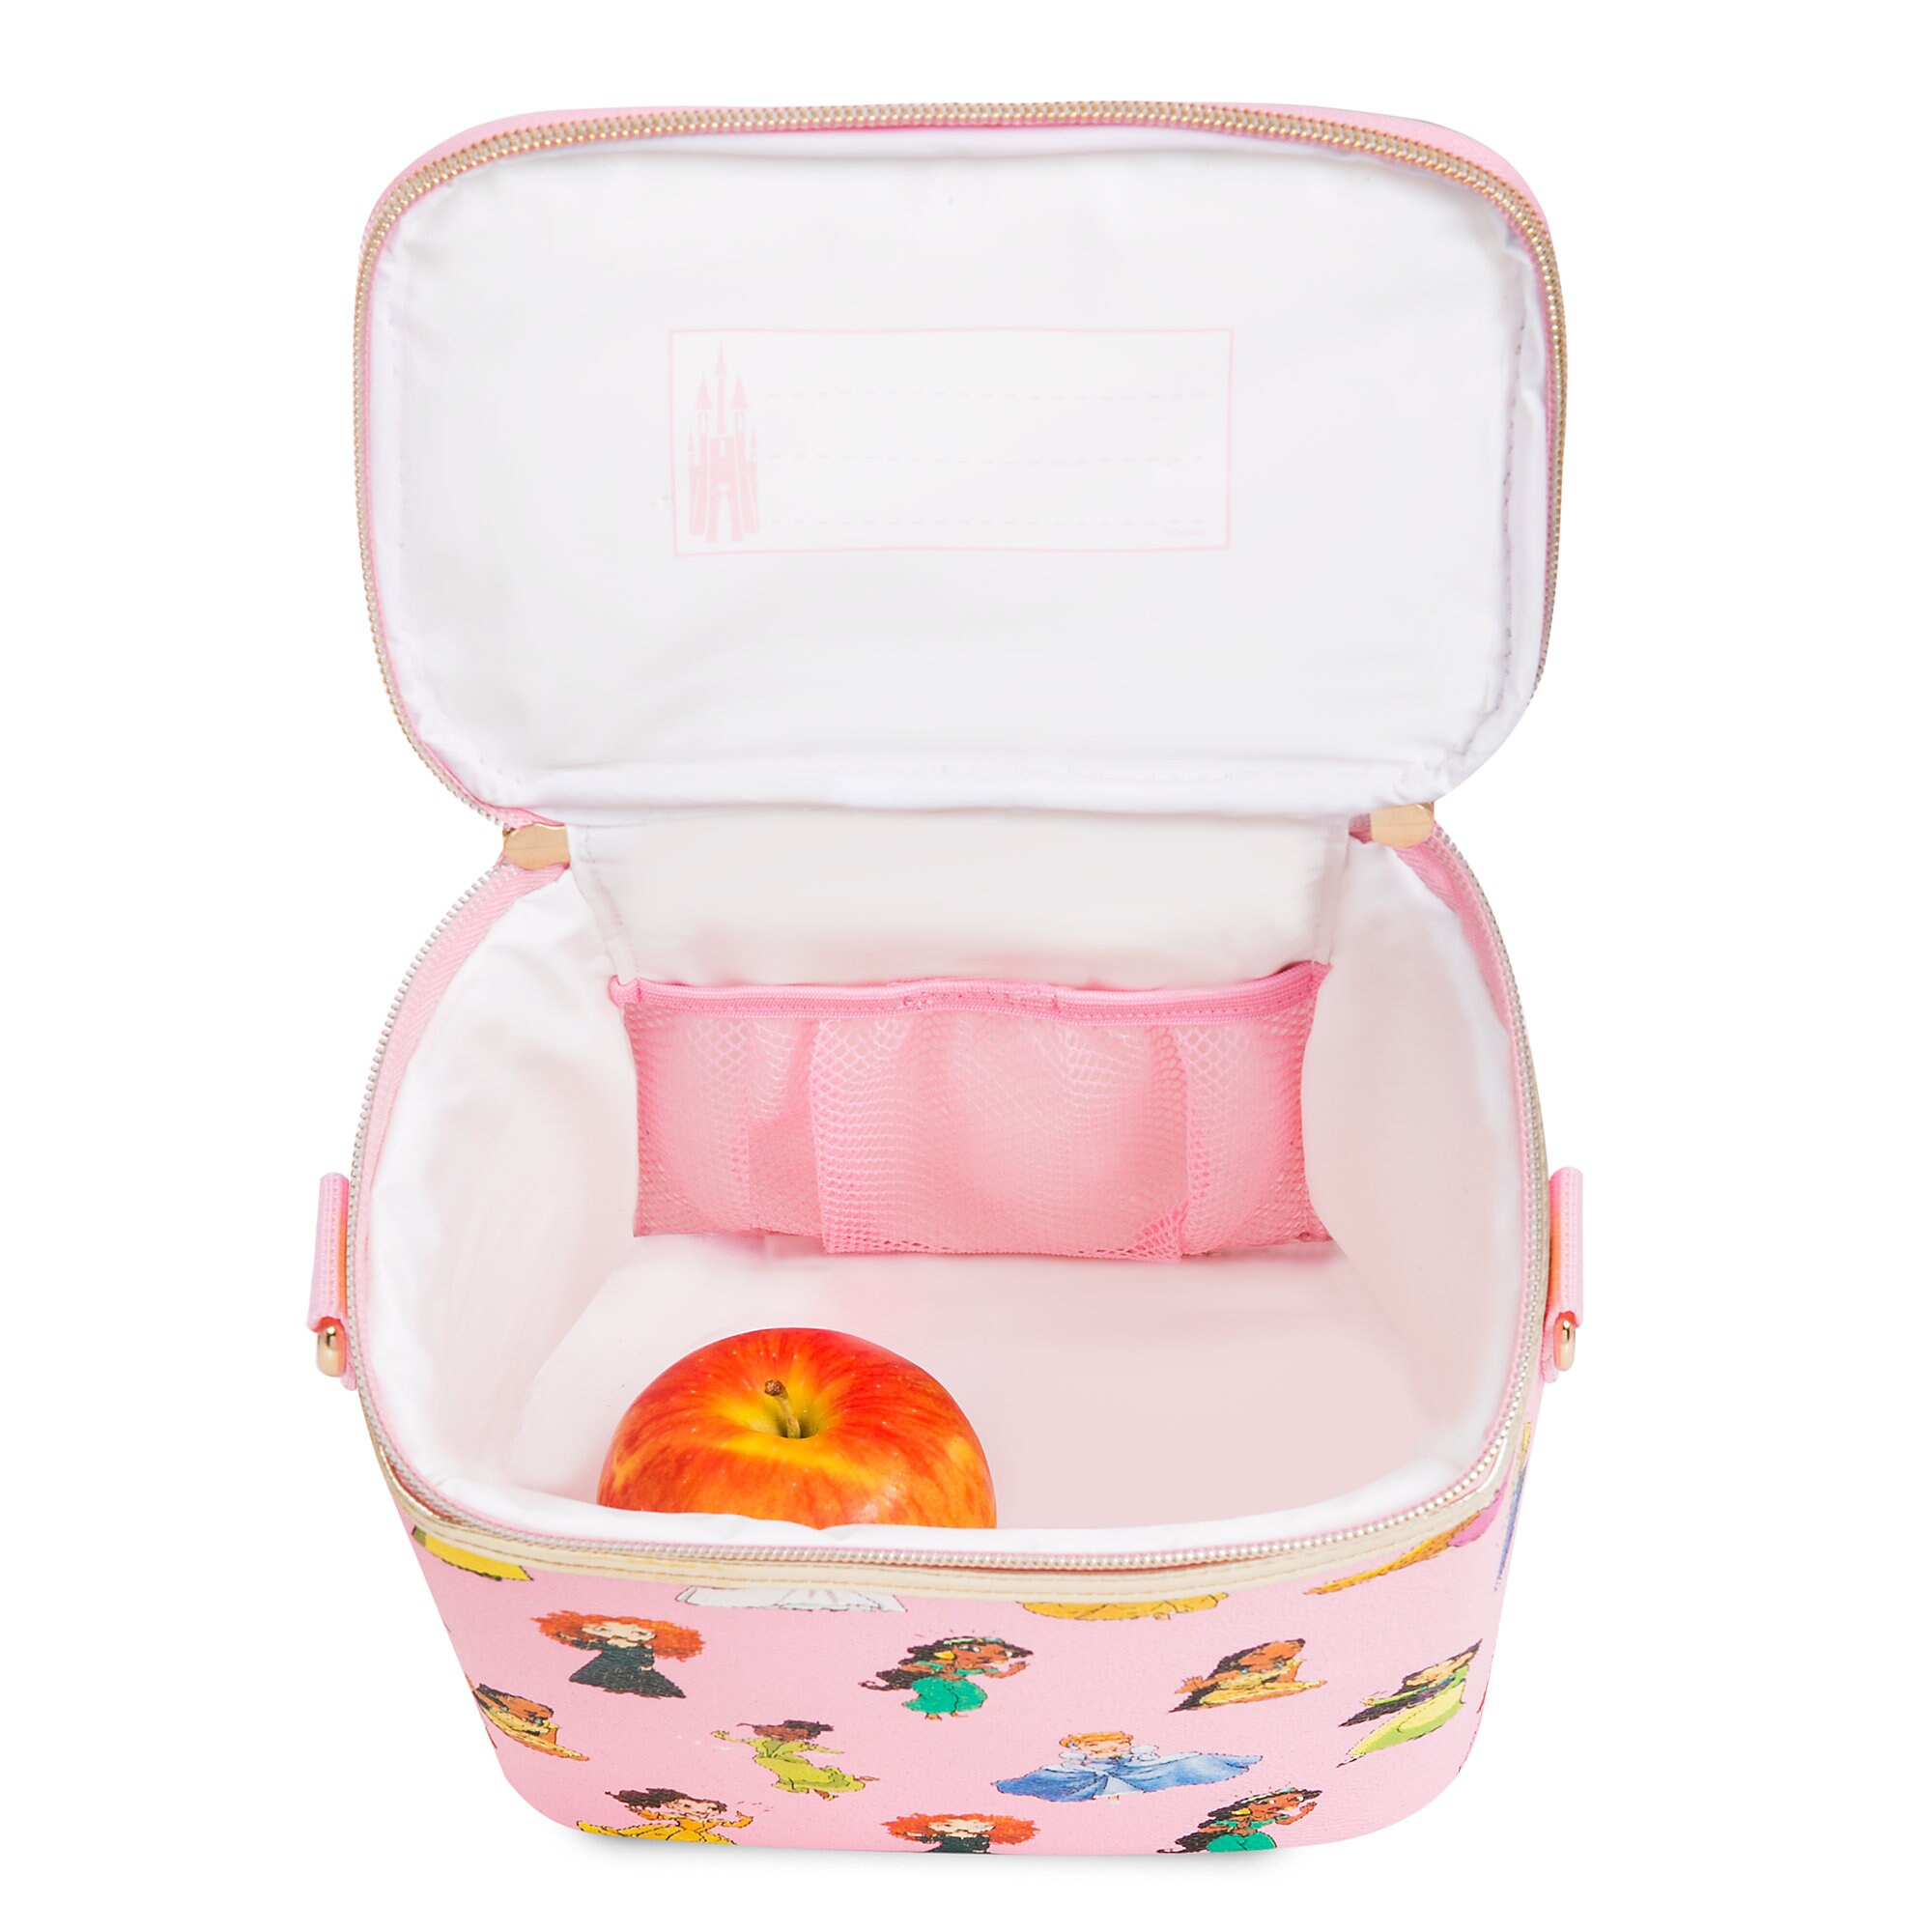 Disney Princess Lunch Box is now available for purchase